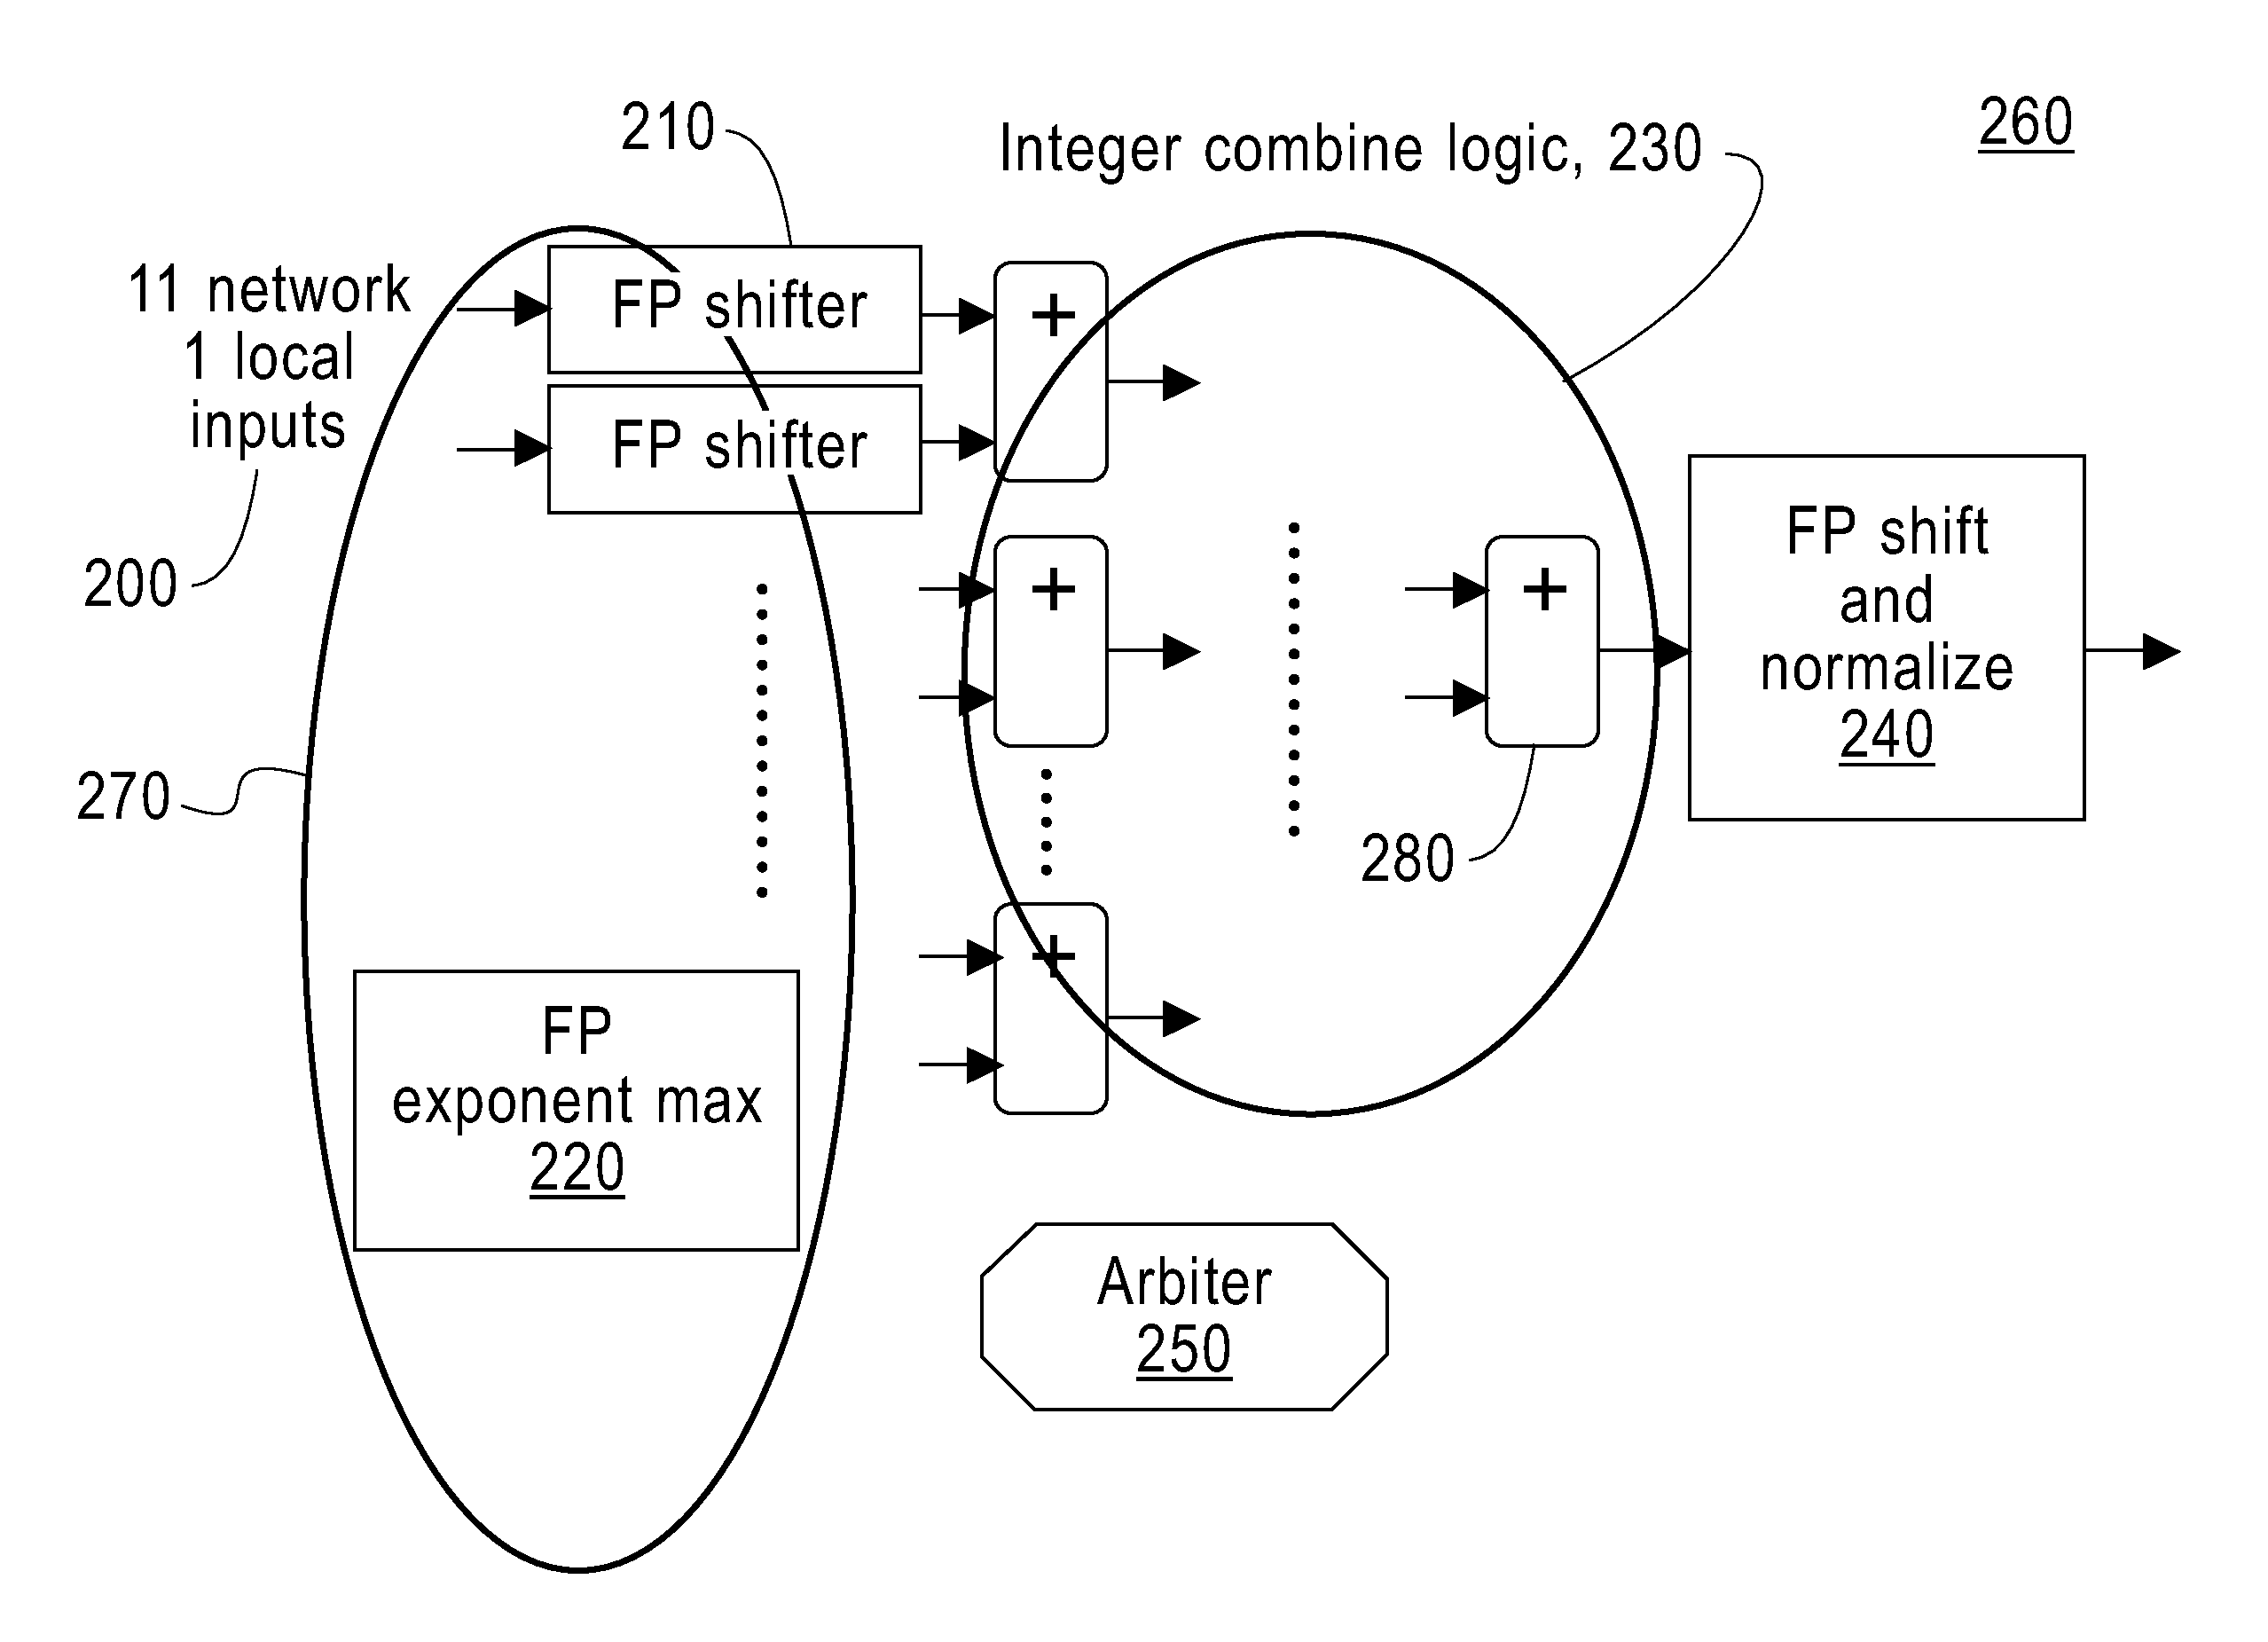 Multi-input and binary reproducible, high bandwidth floating point adder in a collective network